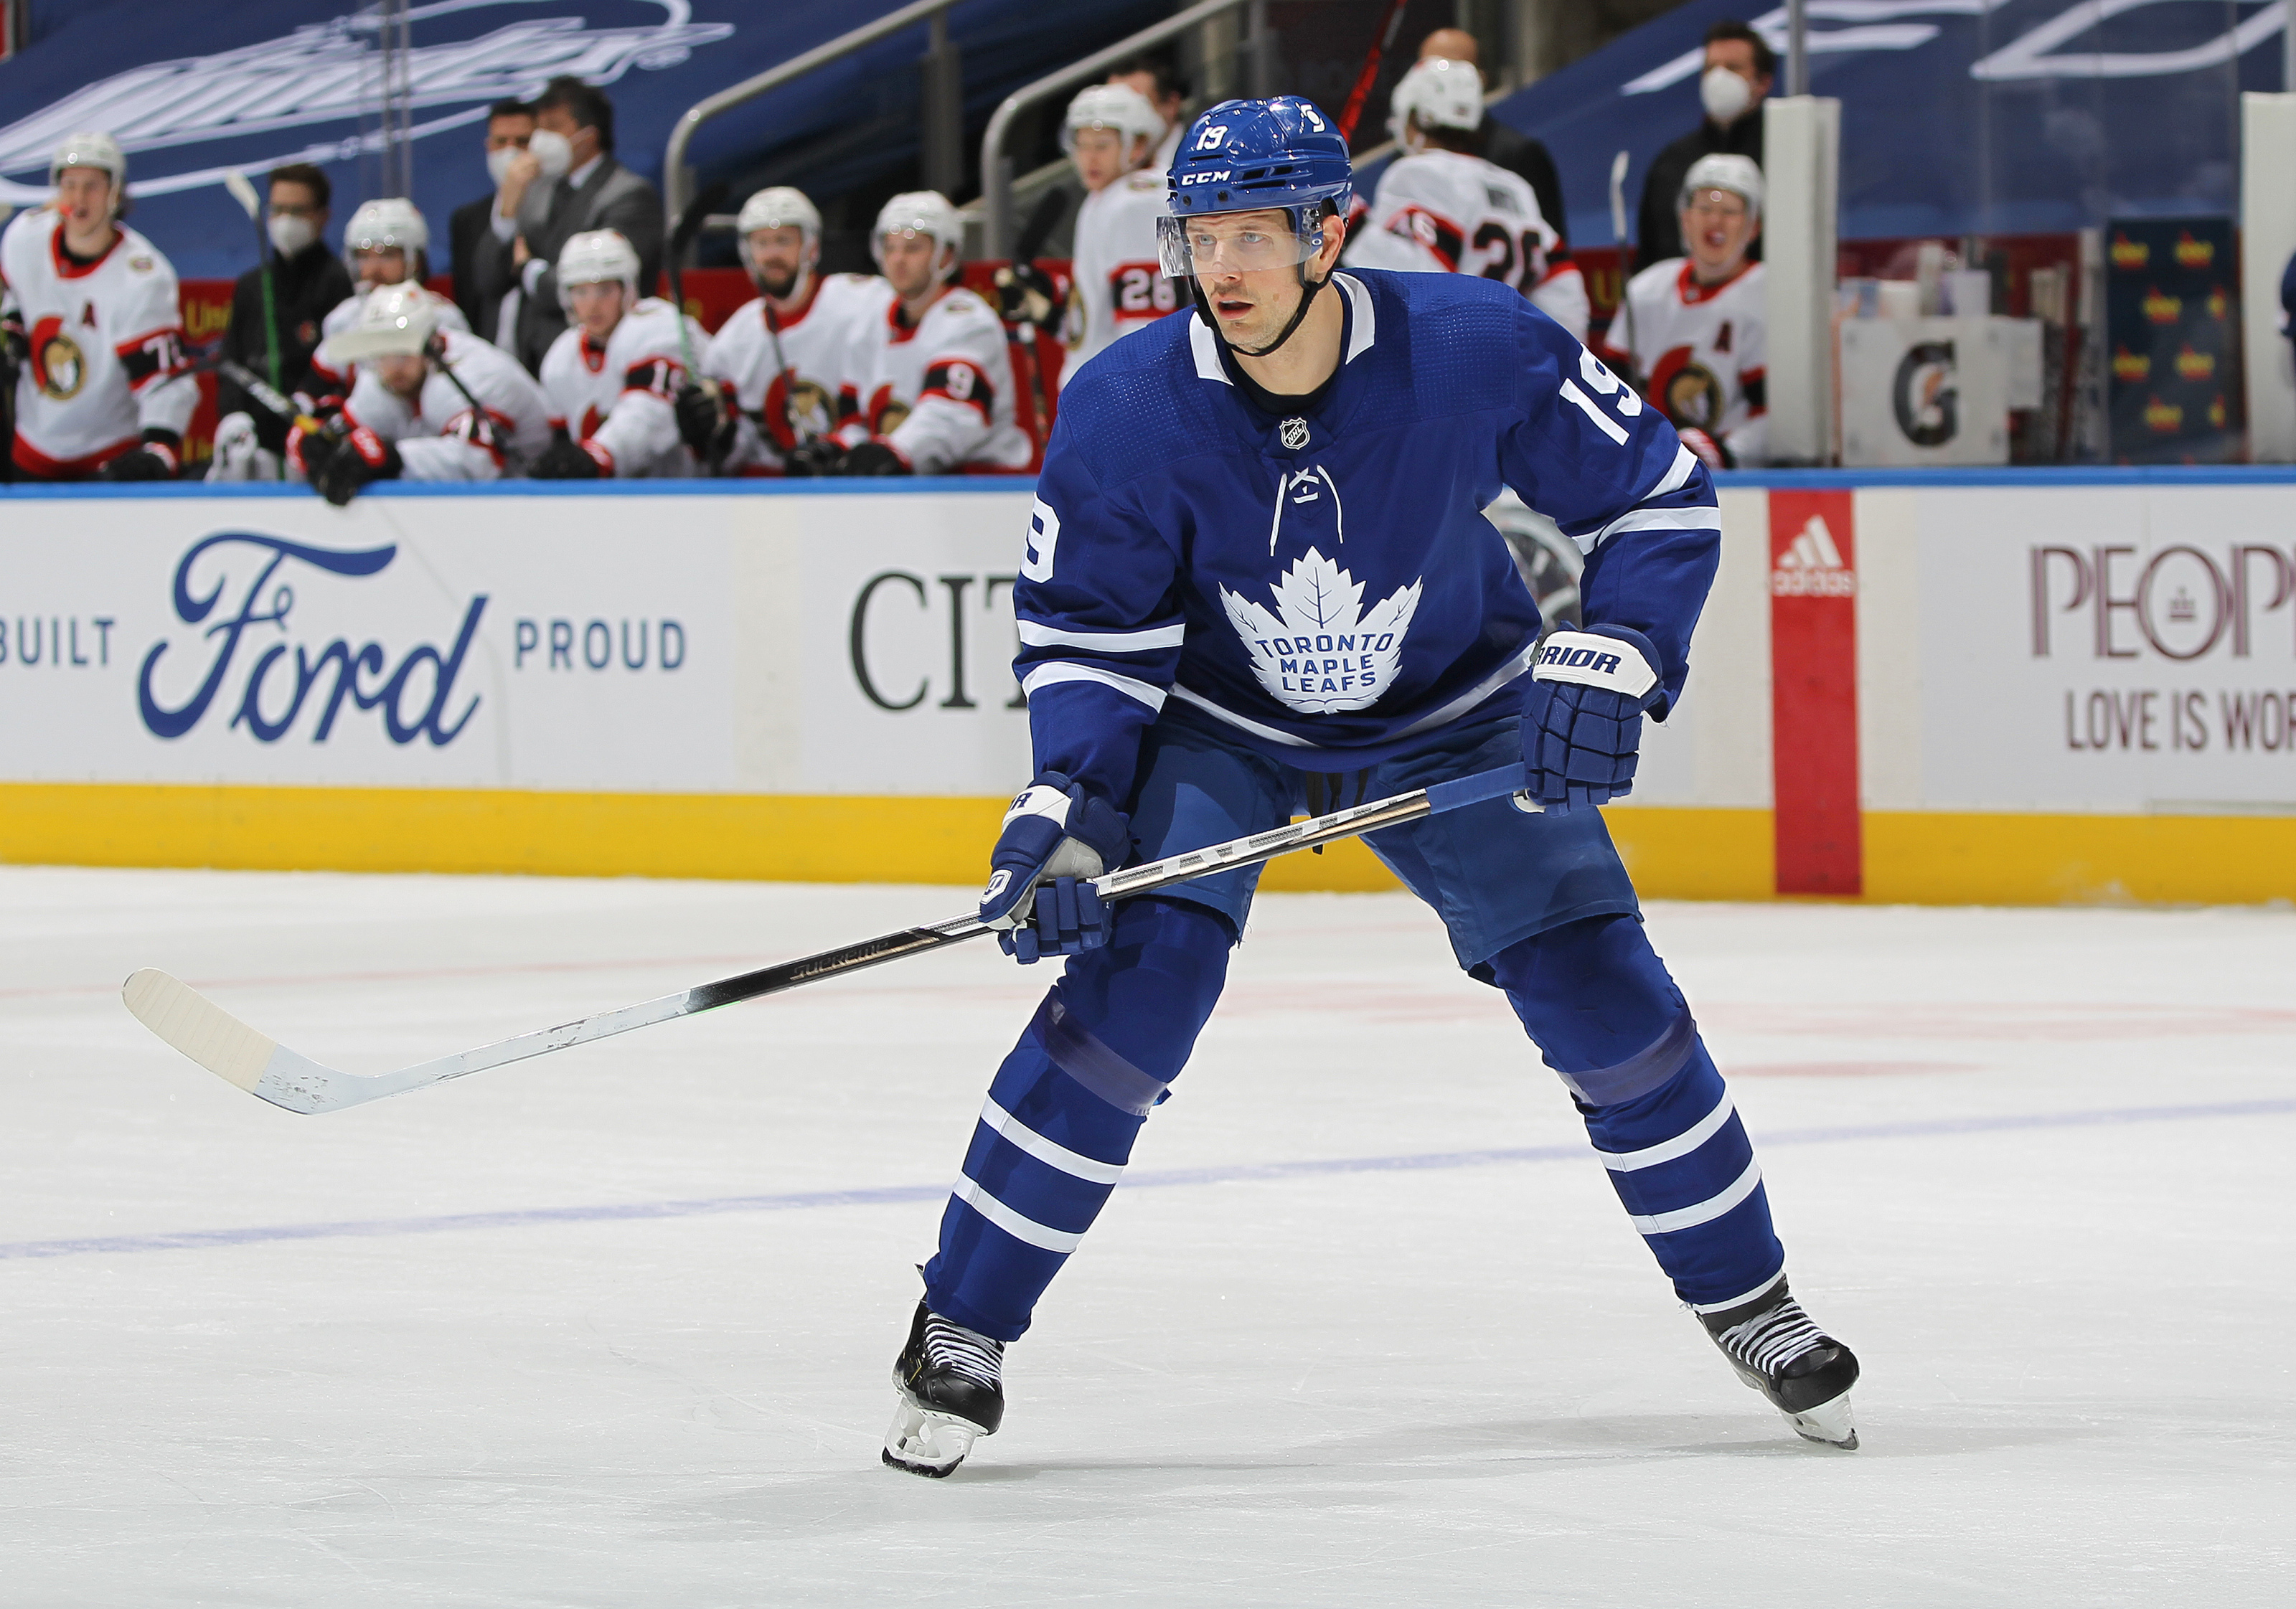 Maple Leafs' Spezza reflects on Senators' 2007 Stanley Cup appearance